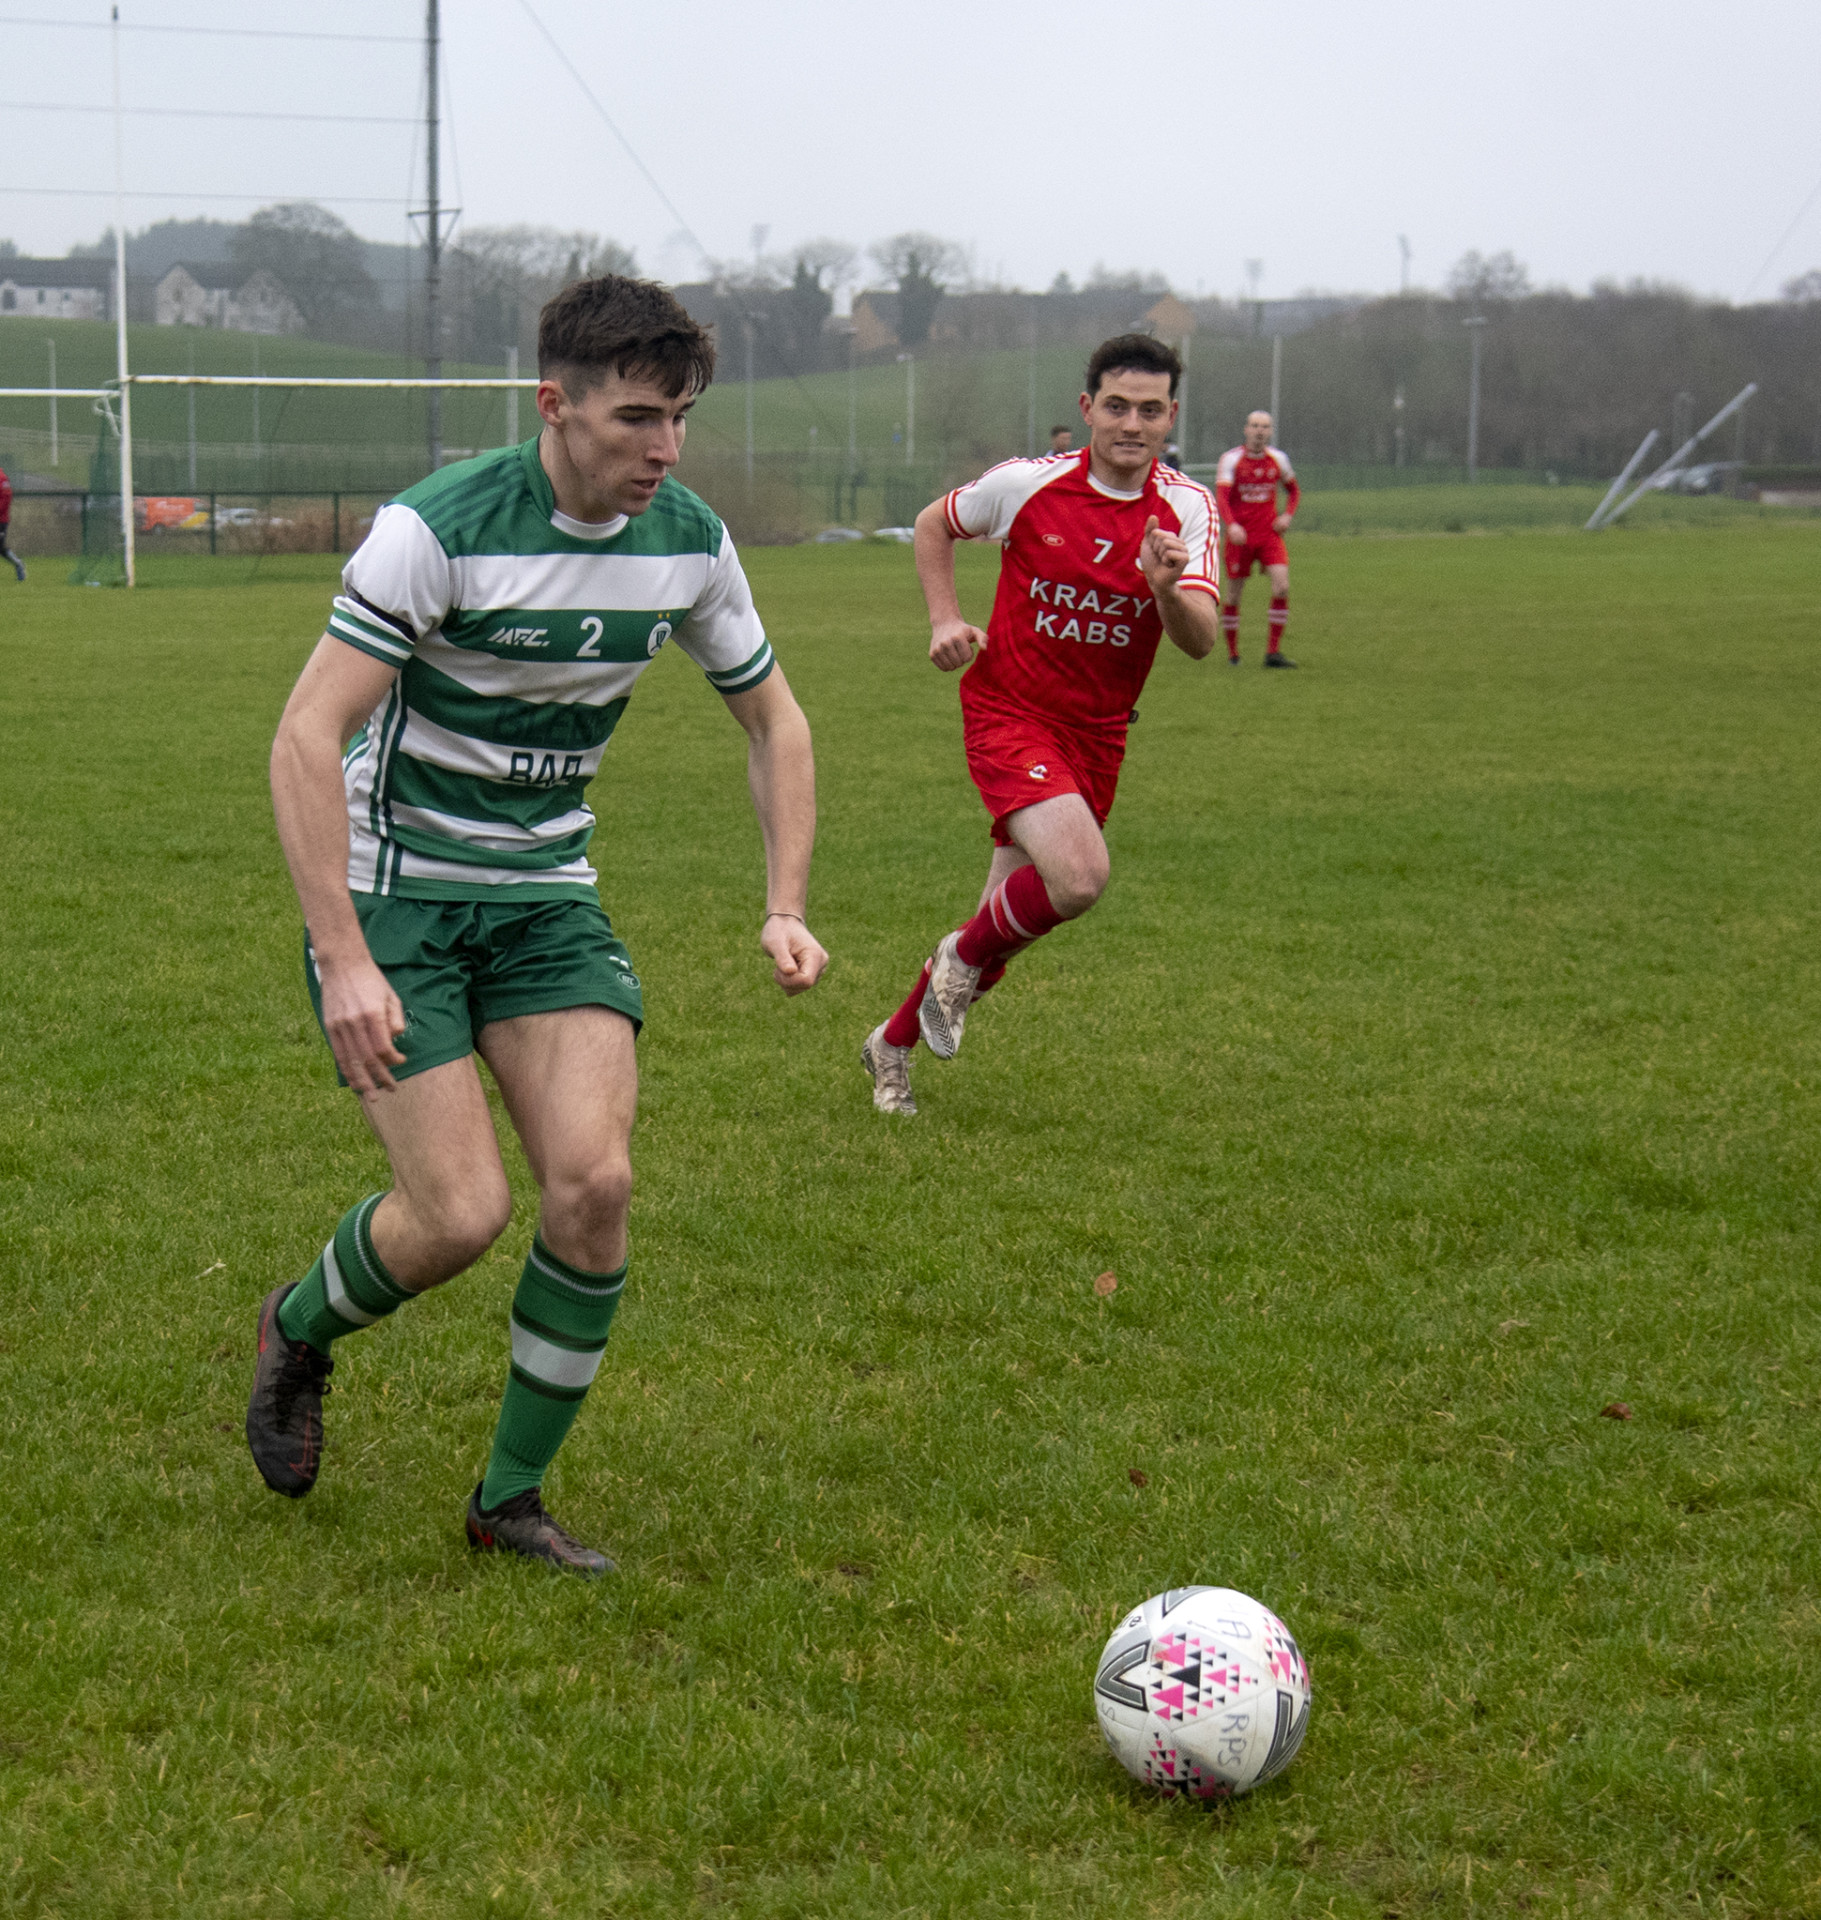 Strathroy Harps complete a league double over Rangers